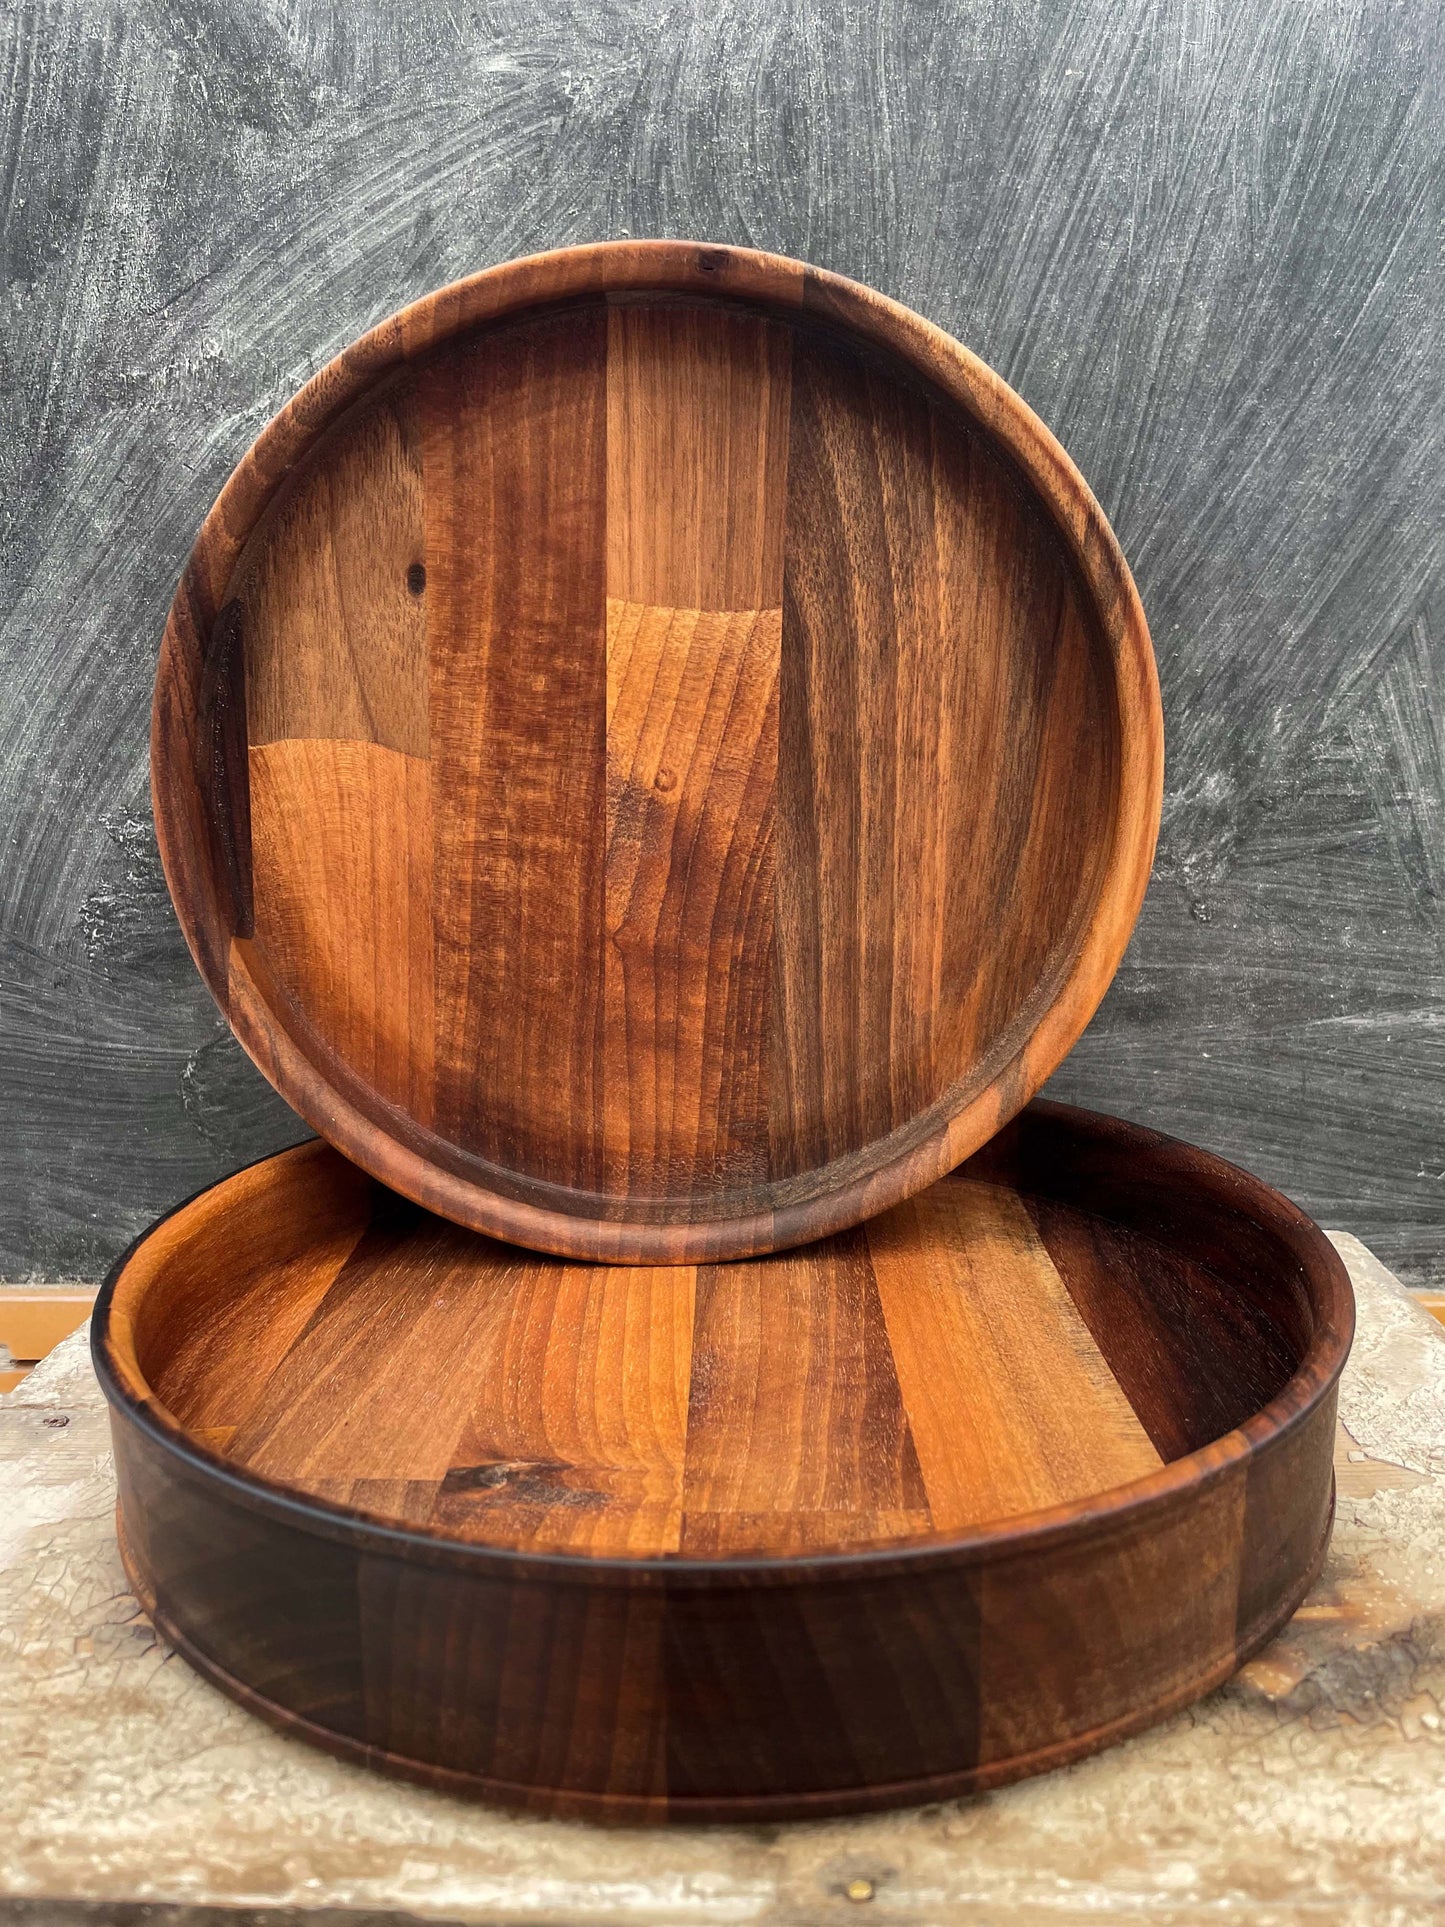 Mixed Wood Trays - The Twin Set